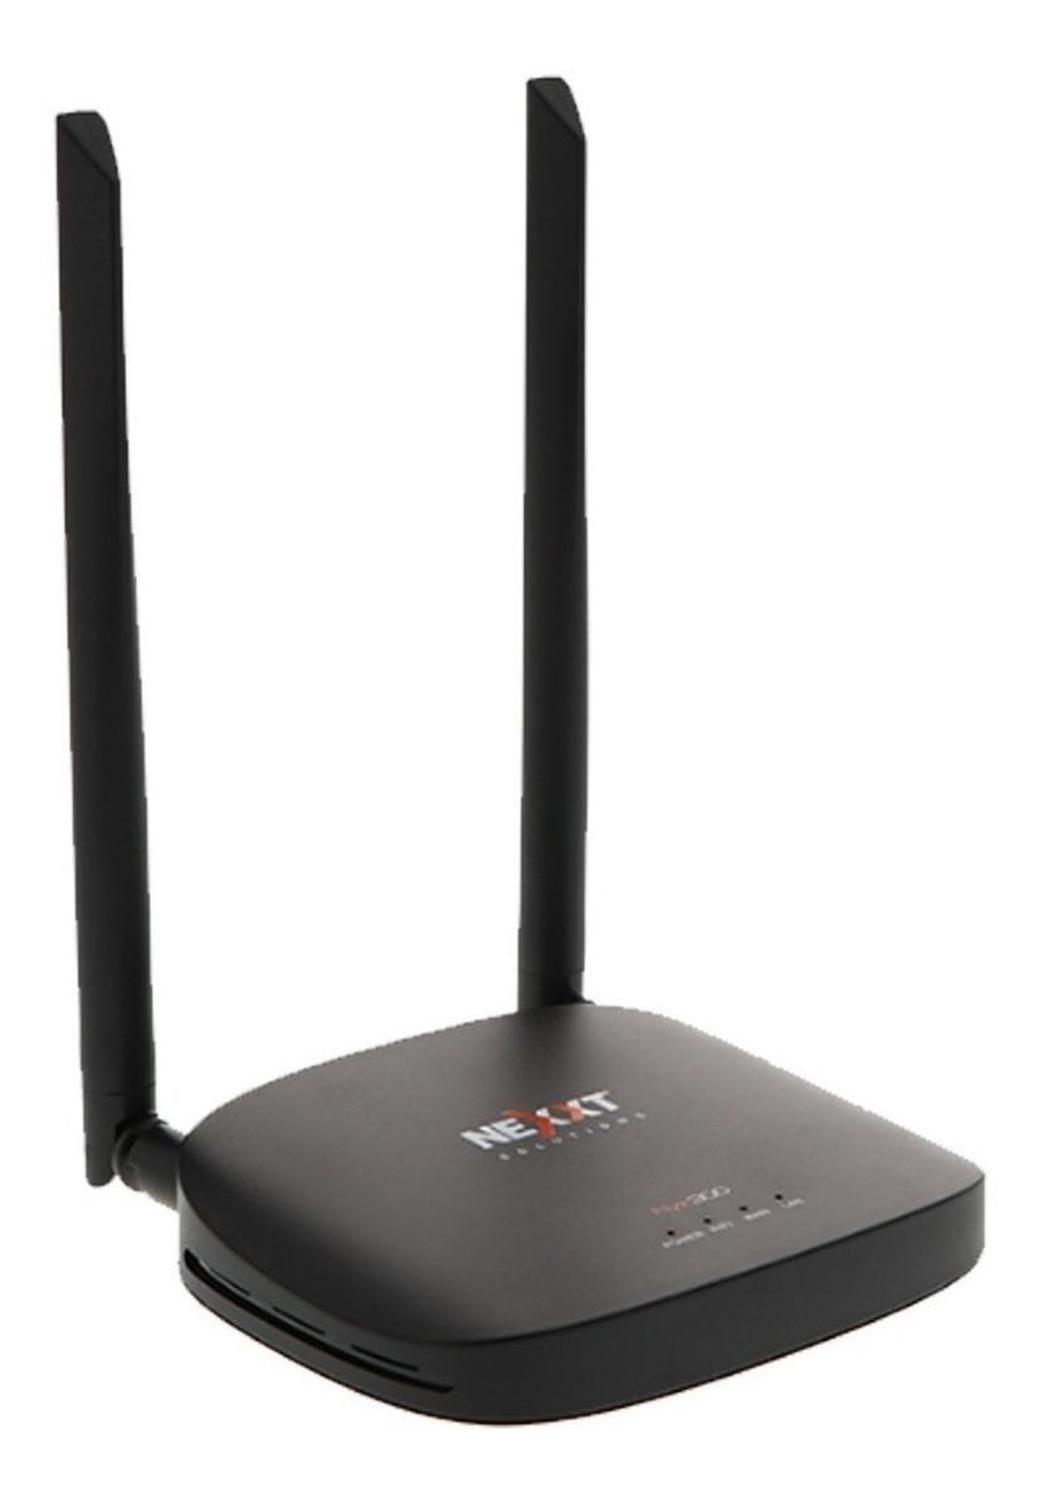 Nexxt Solutions Nyx 300 Access Point, Repetidor, Router